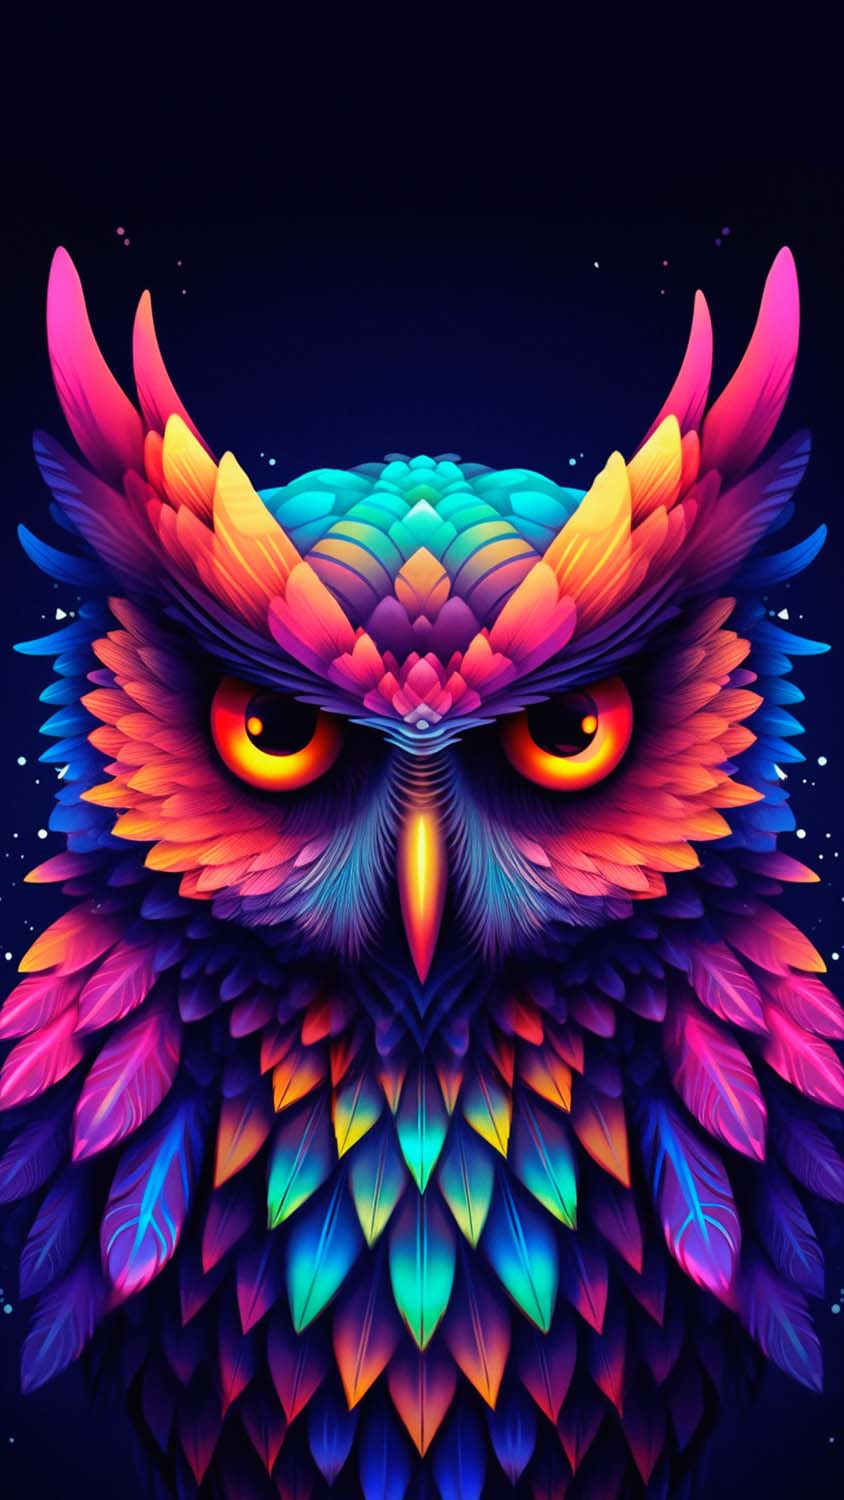 Mystery Owl IPhone Wallpaper 4K  IPhone Wallpapers